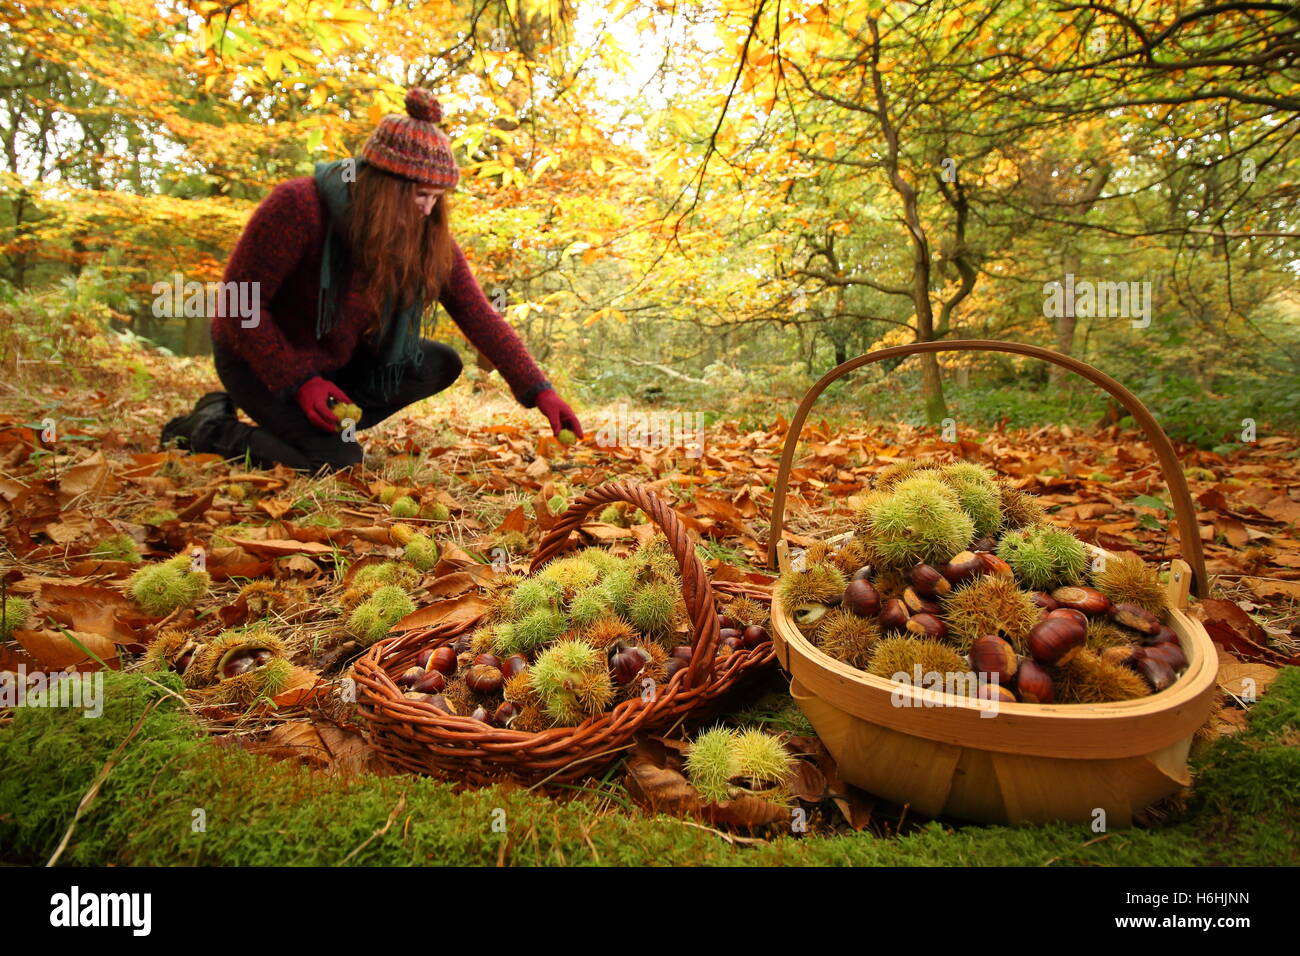 Sweet chestnuts (castanea sativa) are collected from the floor an ancient deciduous woodland in Sheffield, England UK - October Stock Photo